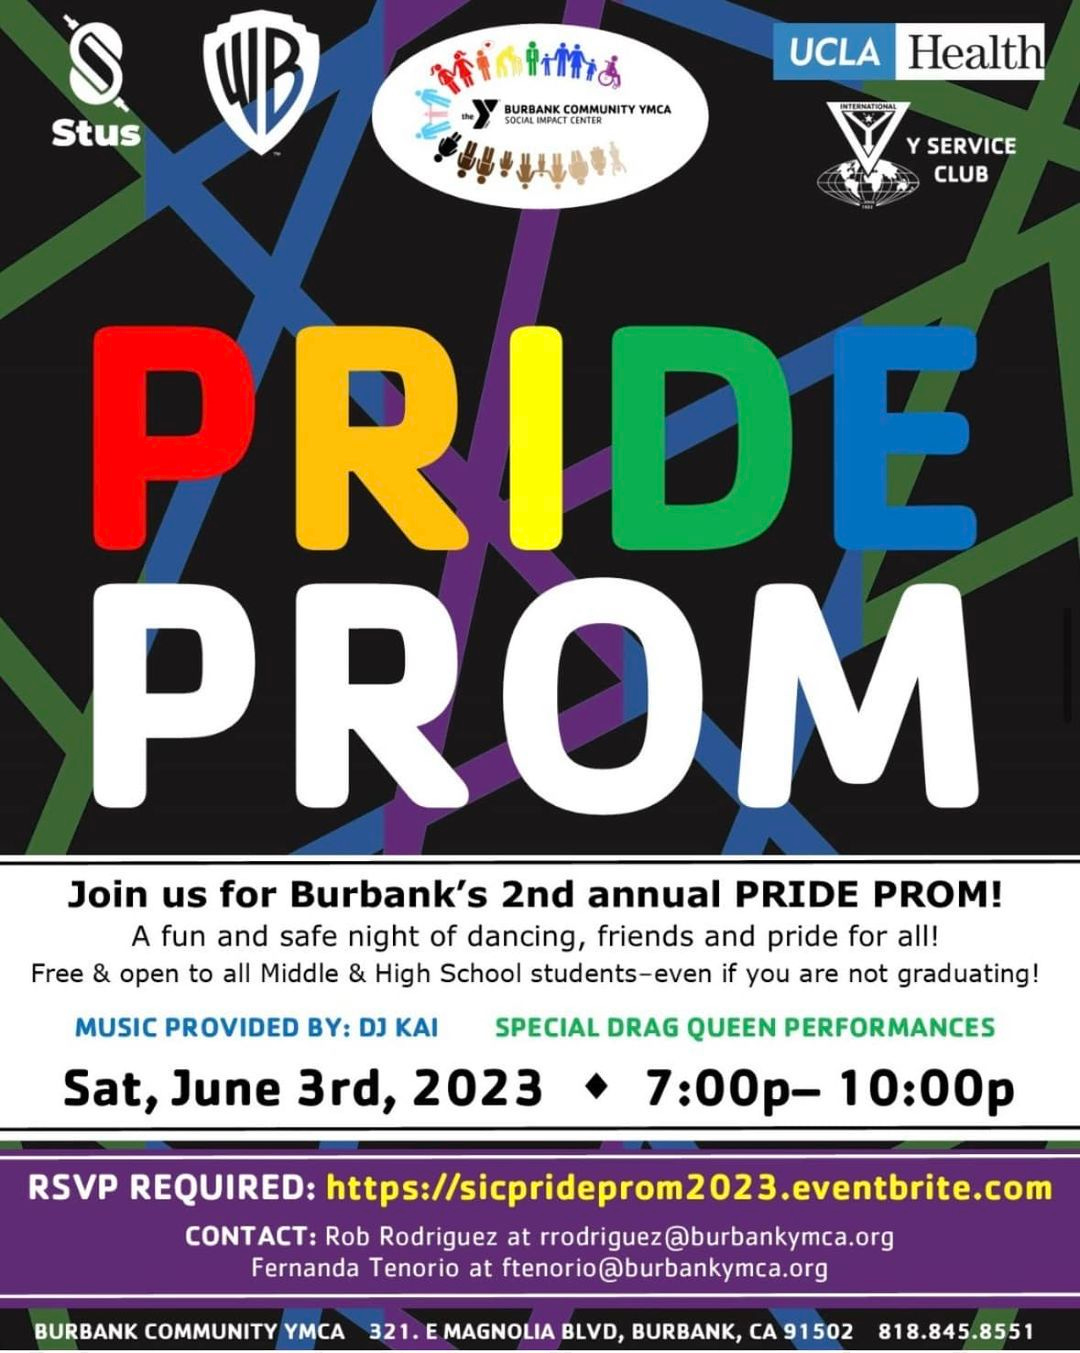 May be an image of text that says 'S Stus WB ቅተጠስብነக B BURBANK COMMUNITY MCA UCLA Health YSERVICE CLUB Free PRIDE PROM Join us for Burbank's 2nd annual PRIDE PROM! A fun and safe night of dancing, friends and pride for all! open to all Middle & High School students-ever if you are not graduating! SPECIAL DRAG QUEEN PERFORMANCES 7:00p- 10:00p MUSIC PROVIDED BY: DJ ΚΑΙ Sat, June 3rd, 2023 RSVP REQUIRED: http:/ciprom2023.eventbrite.com CONTACT: Rob Rodriguez atrrodriguez@burbankymca.org Fernanda Tenorio at ftenorio@burbankymca.org BURBANK COMMUNITY YMCA EMAGNOLIA BLVD, BURBANK, CA 91502 818.845.8551'